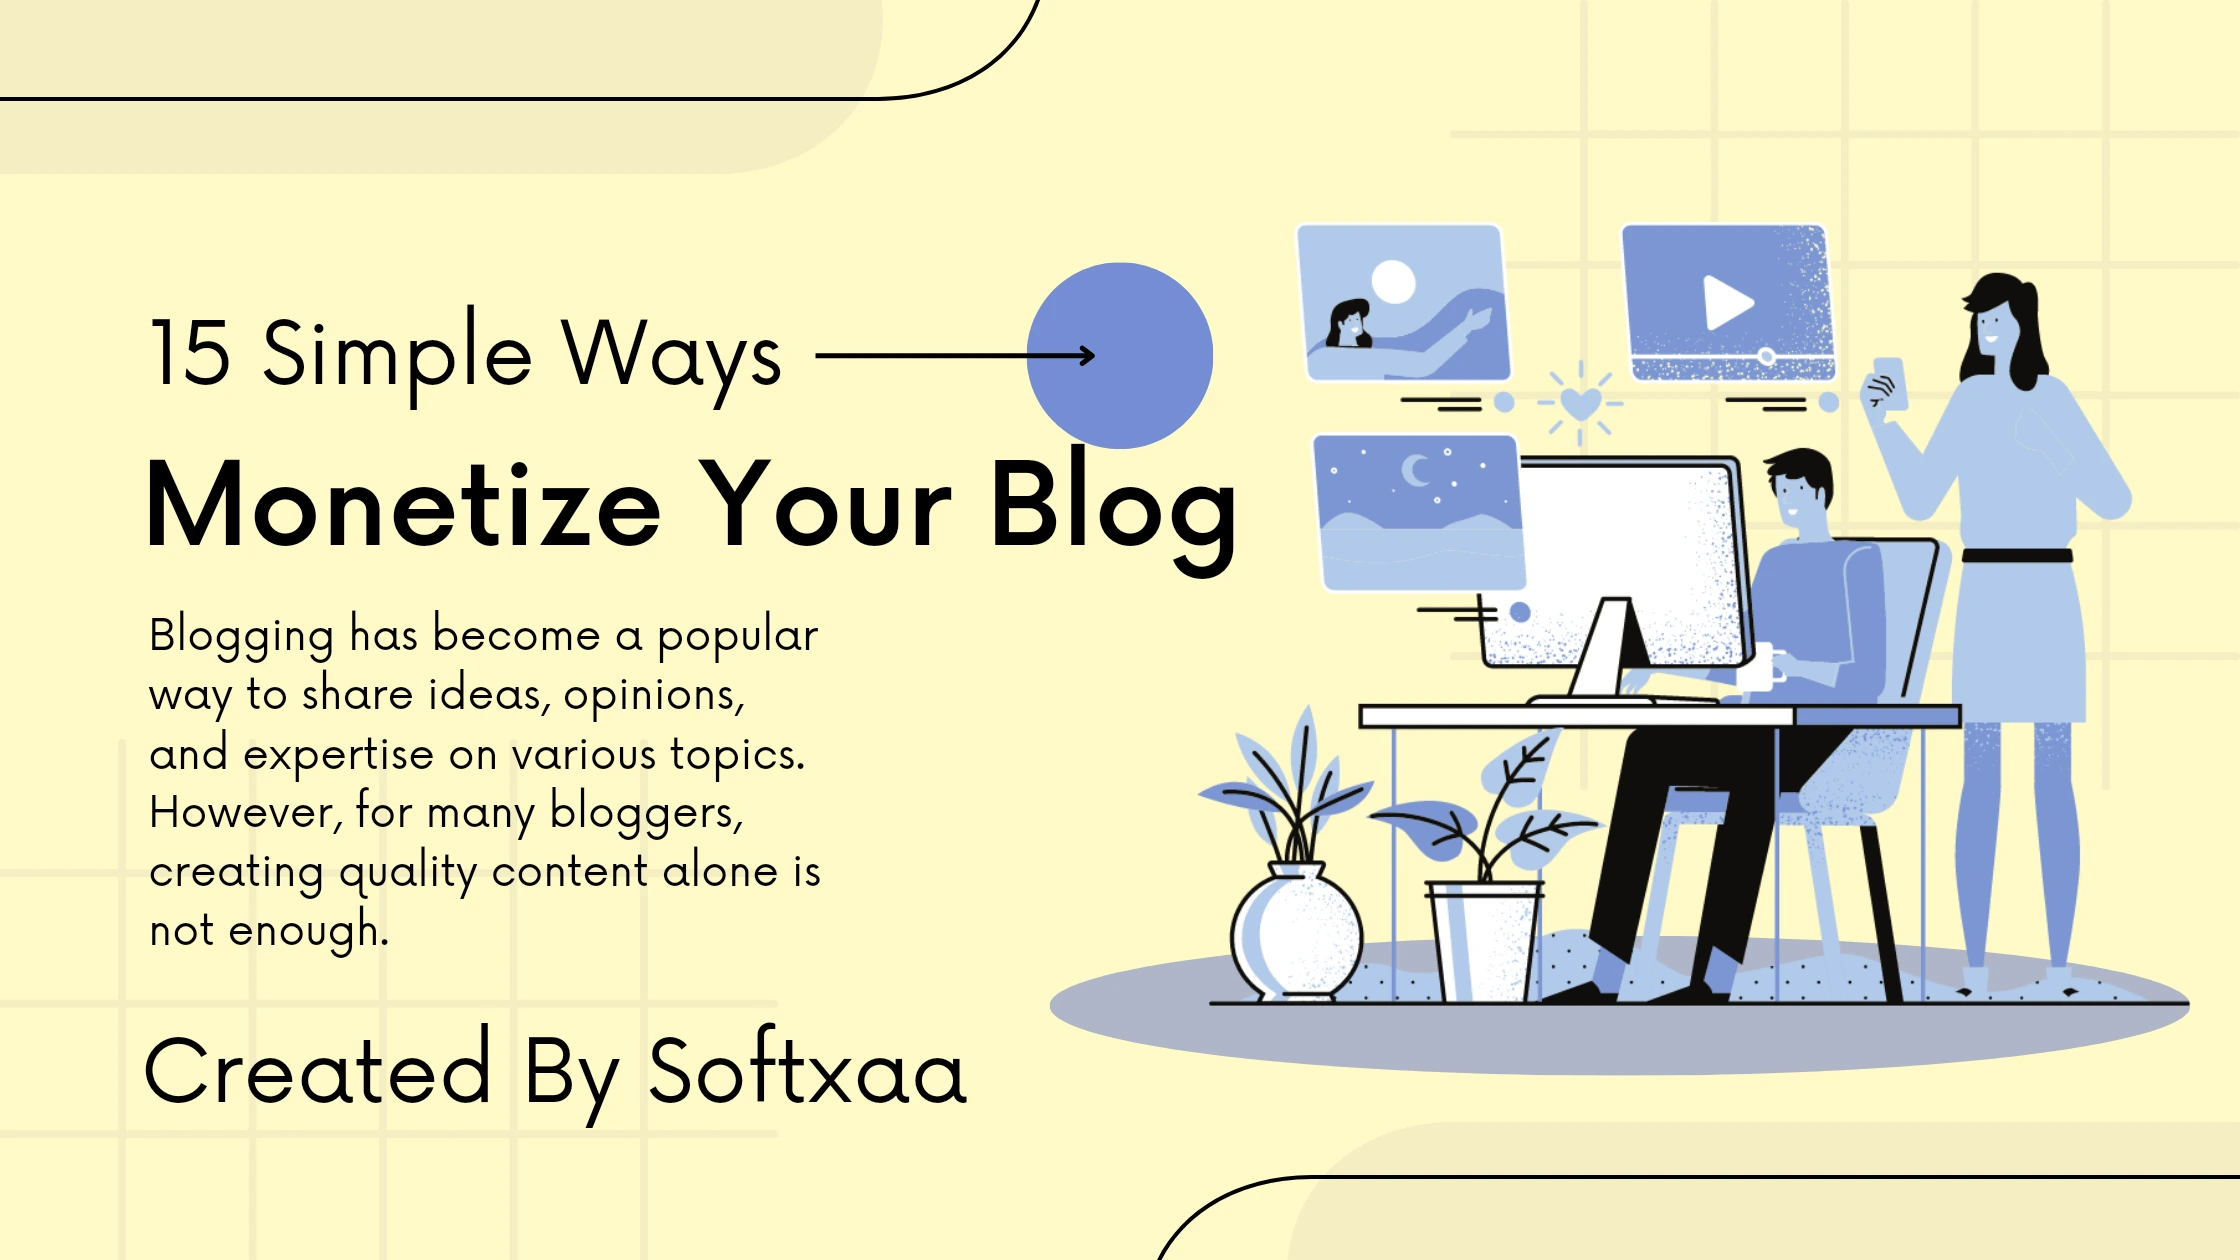 15 simple ways to monetize your blog